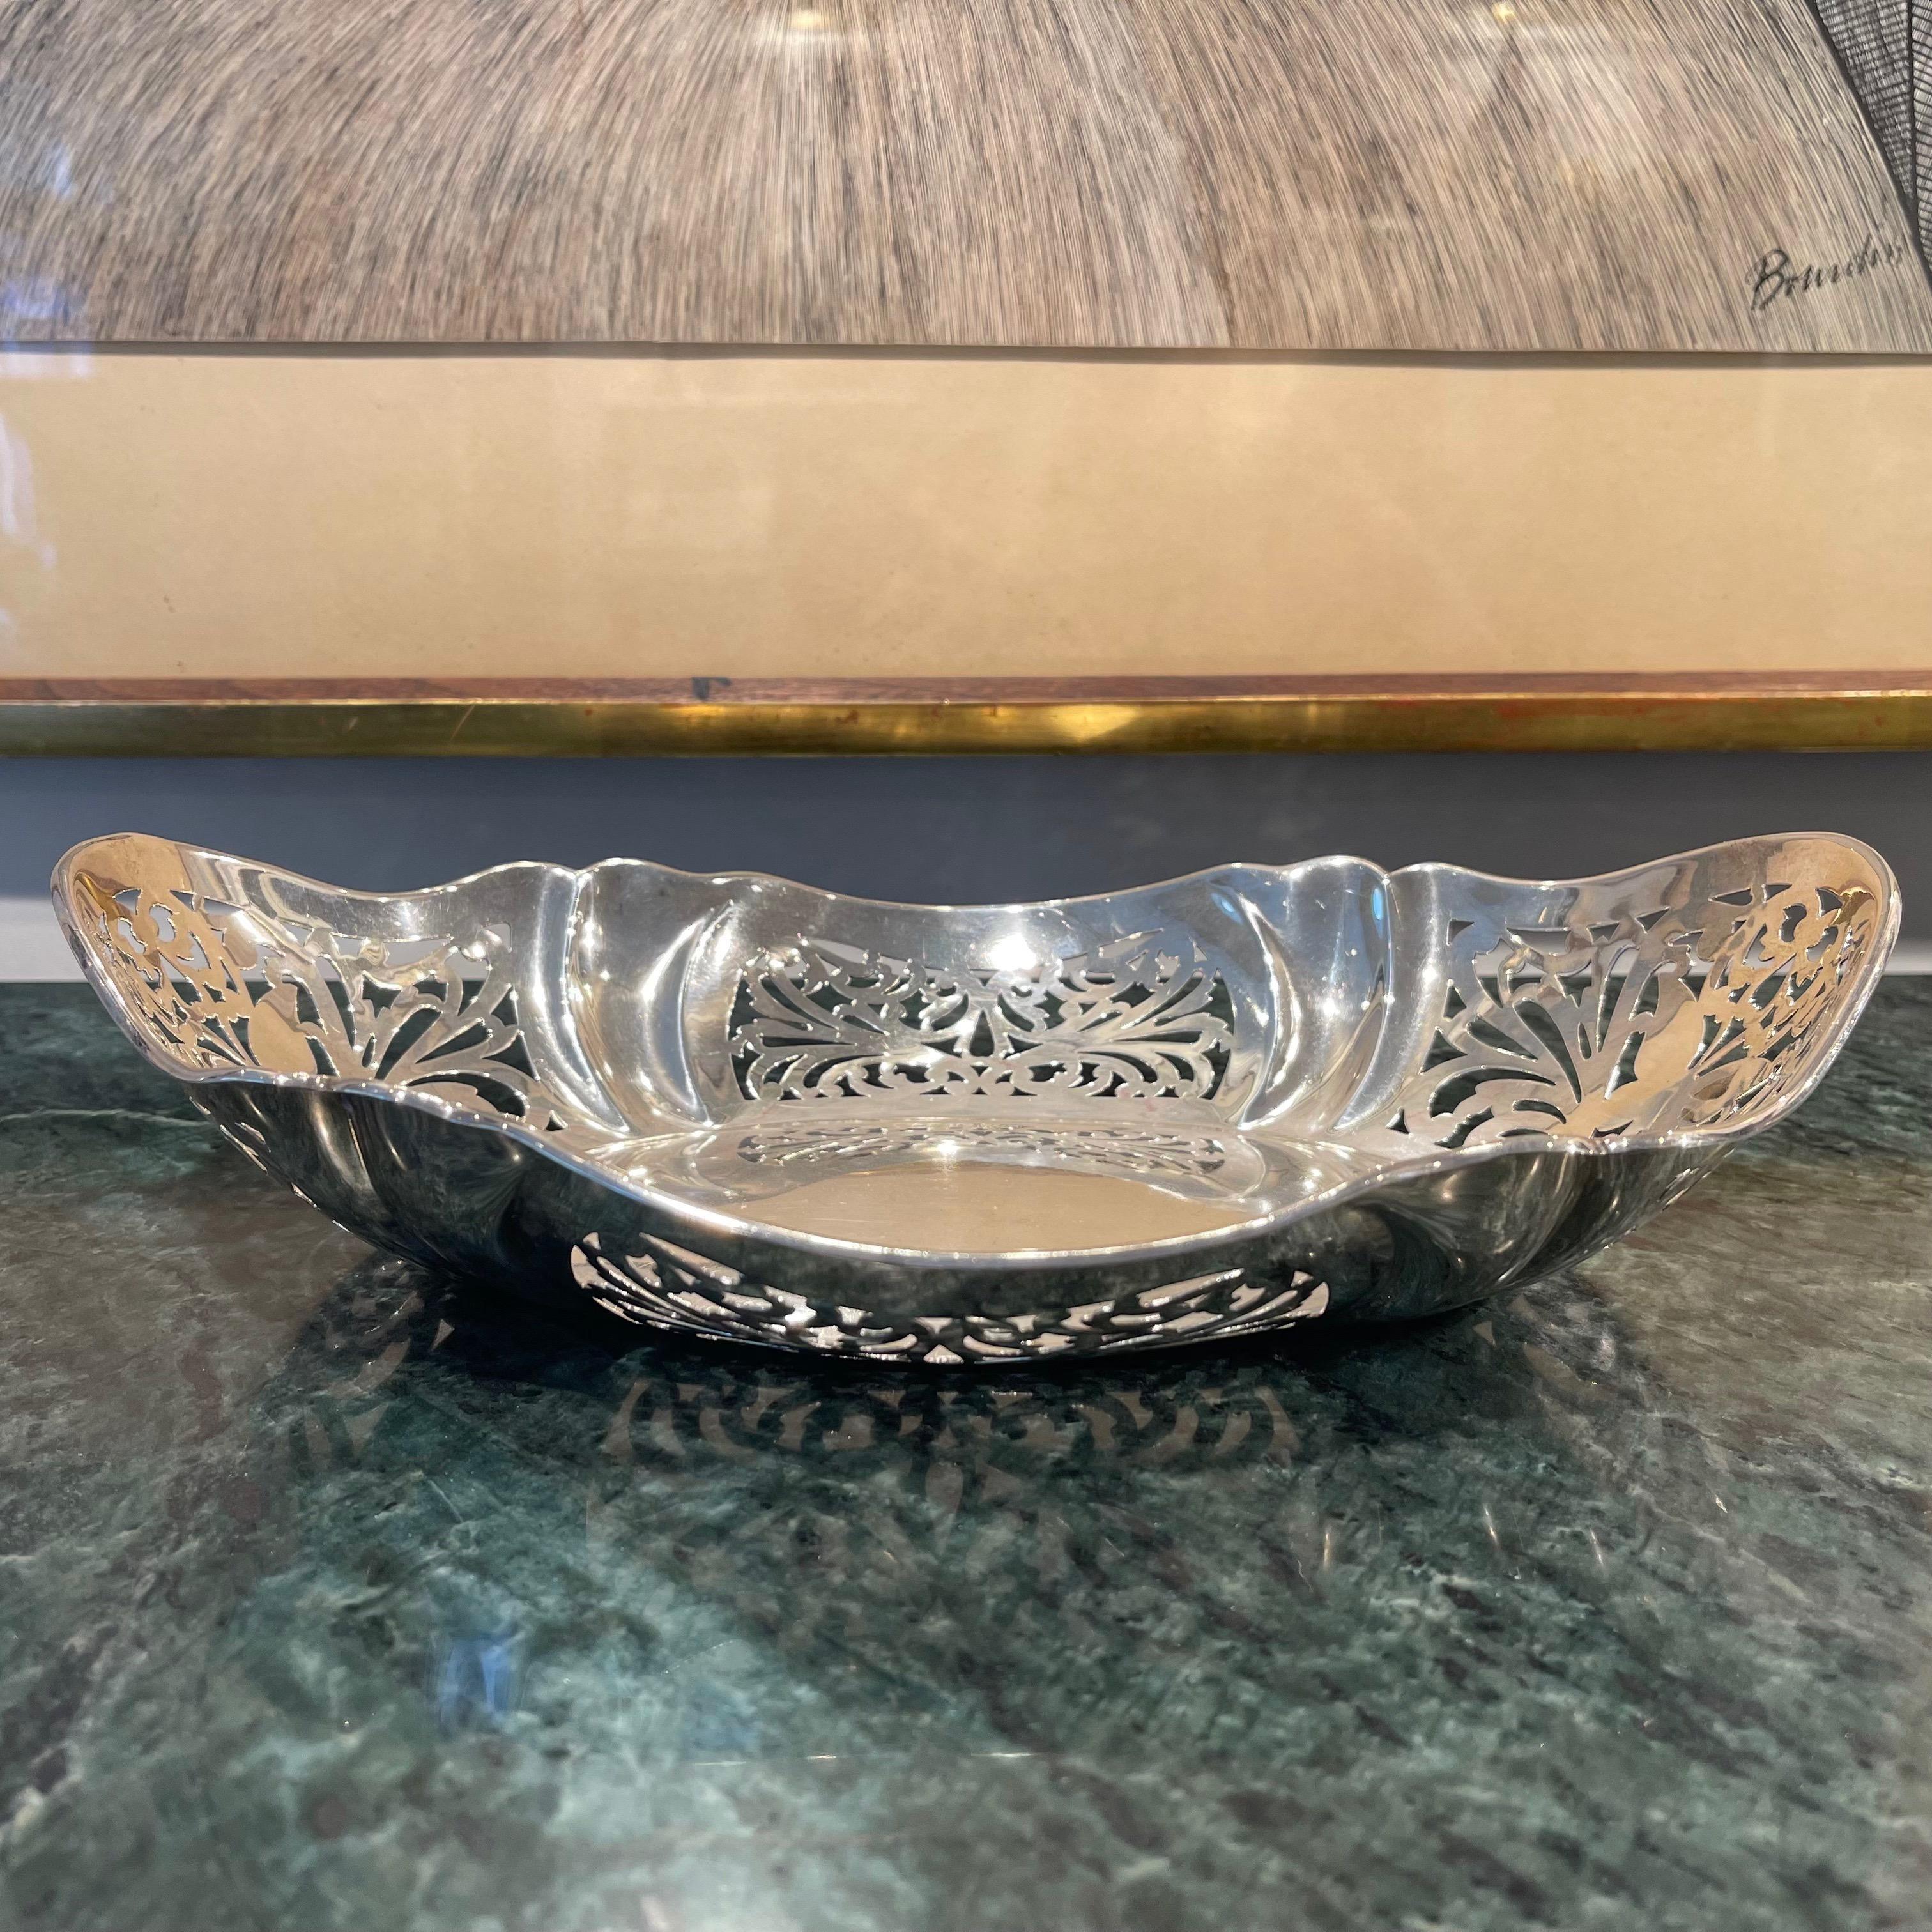 An ornate and decorative Sterling Silver breadbasket, hallmarked to the company of R F Mosley & Co, Sheffield, 1926. The intricate, symmetrical cut-out designs to the sides reveal motifs of butterflies and arabesques that complement the curved